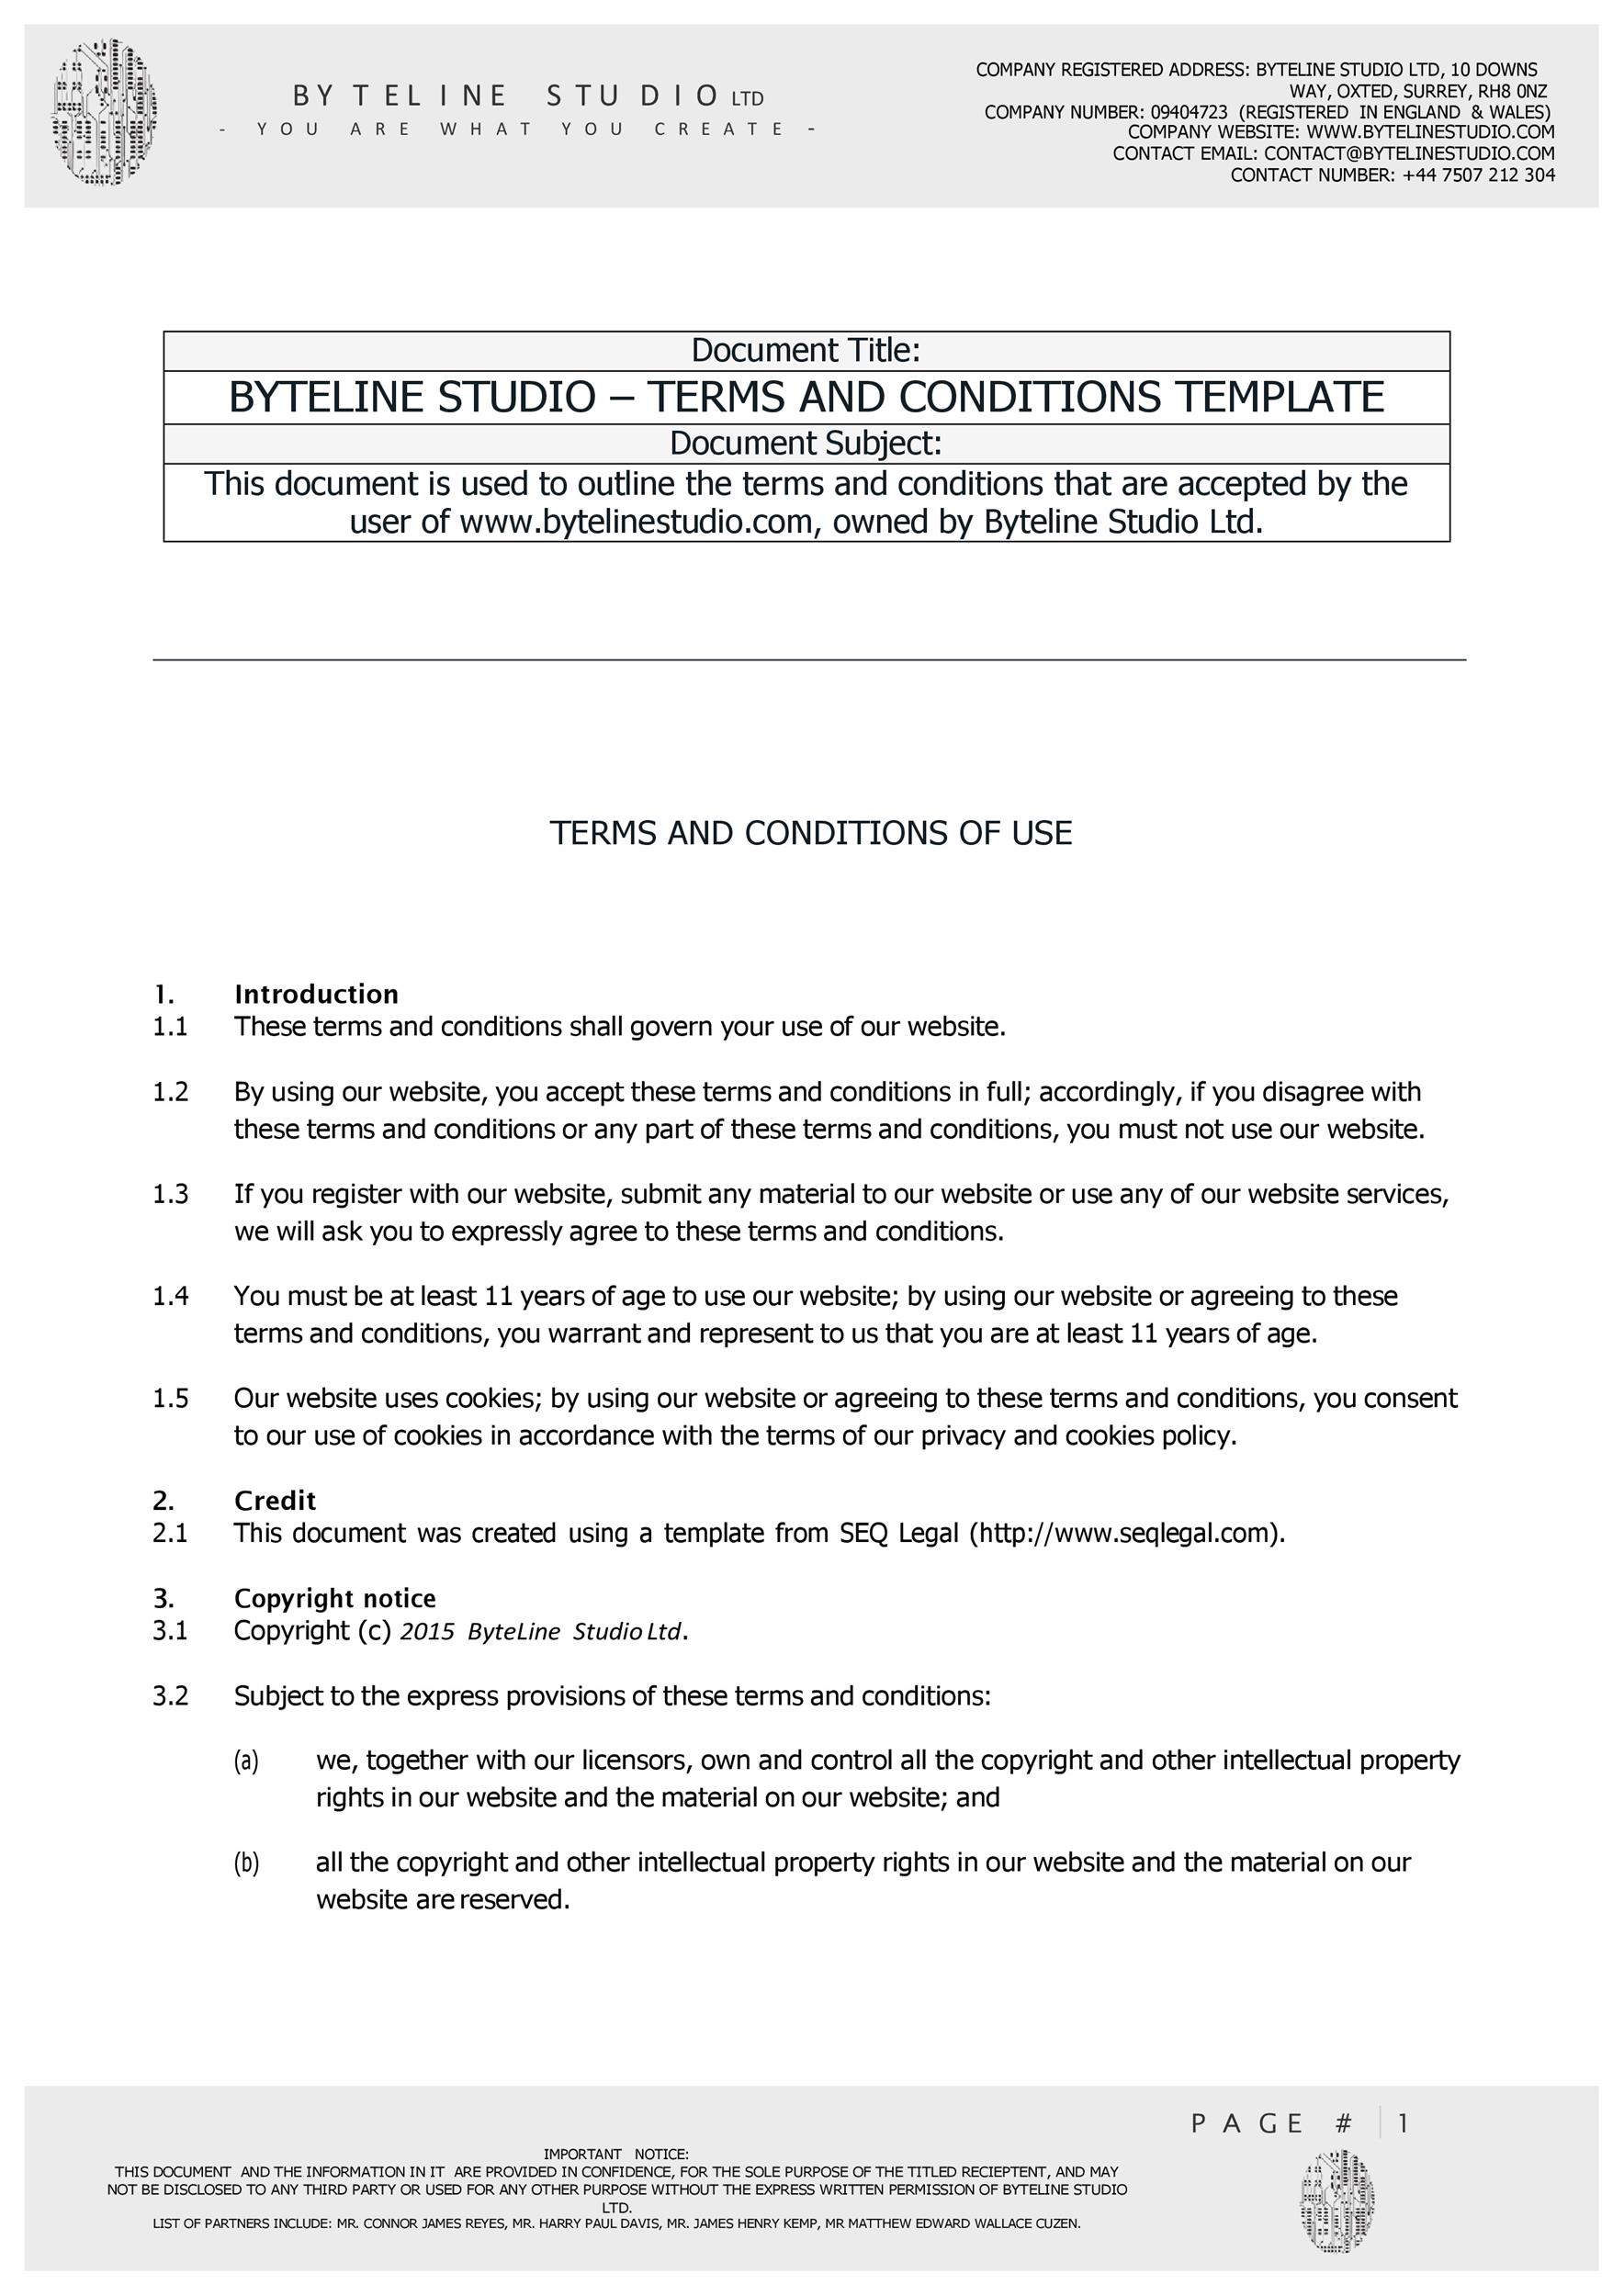 Free terms and conditions template 35